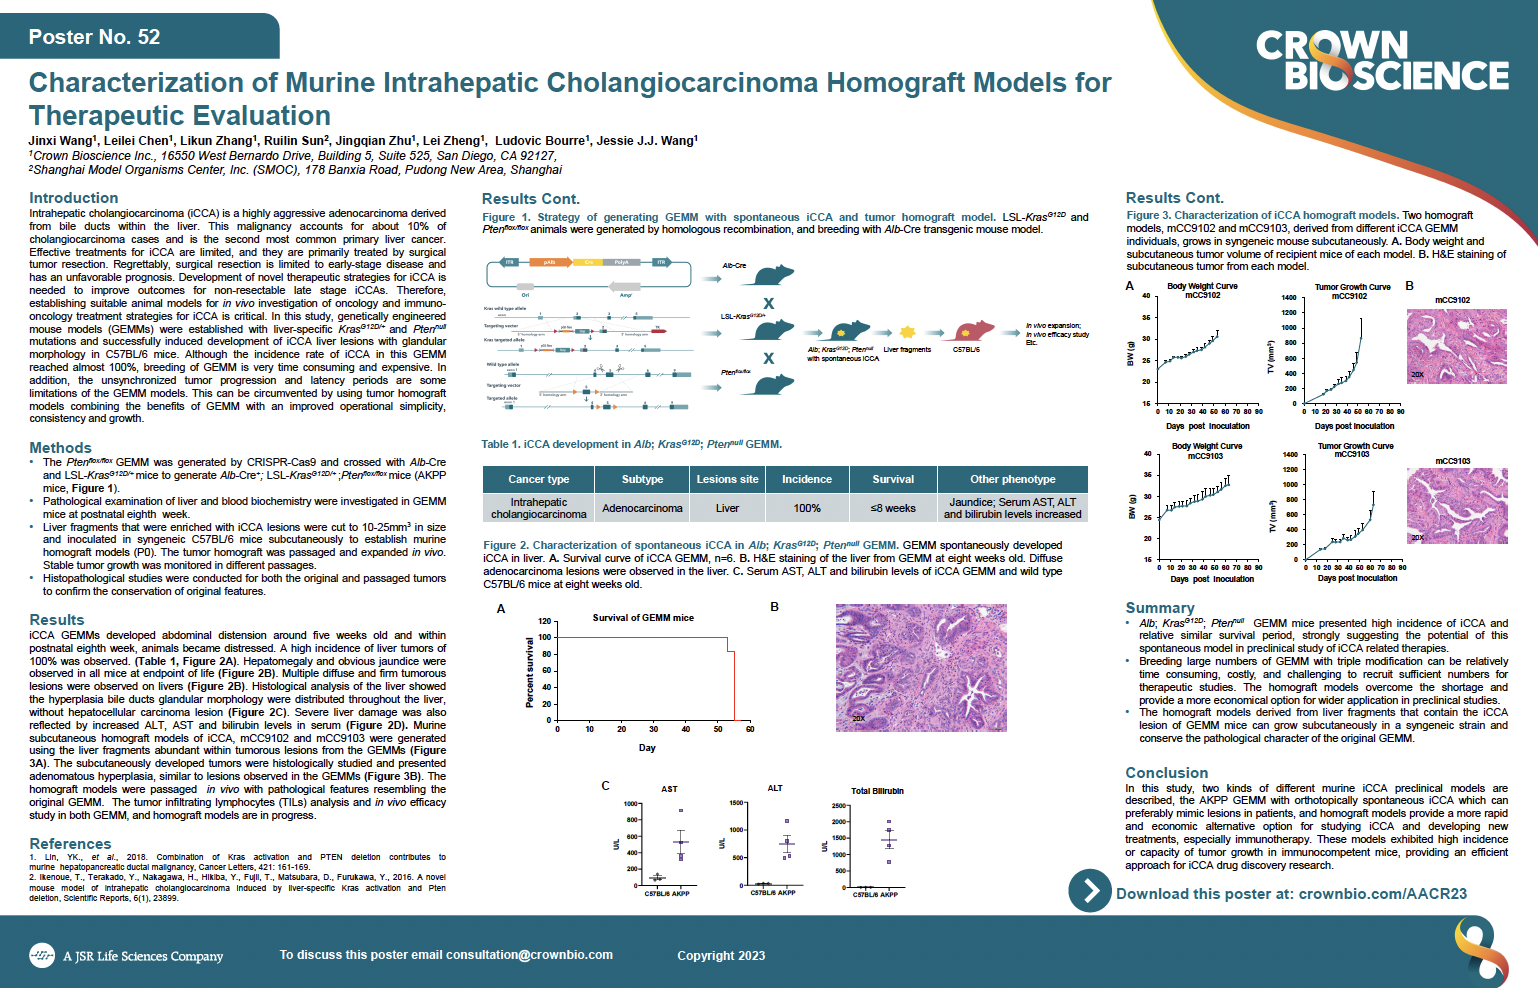 AACR 2023 Posters 52: Characterization of Murine Intrahepatic Cholangiocarcinoma Homograft Models for Therapeutic Evaluation